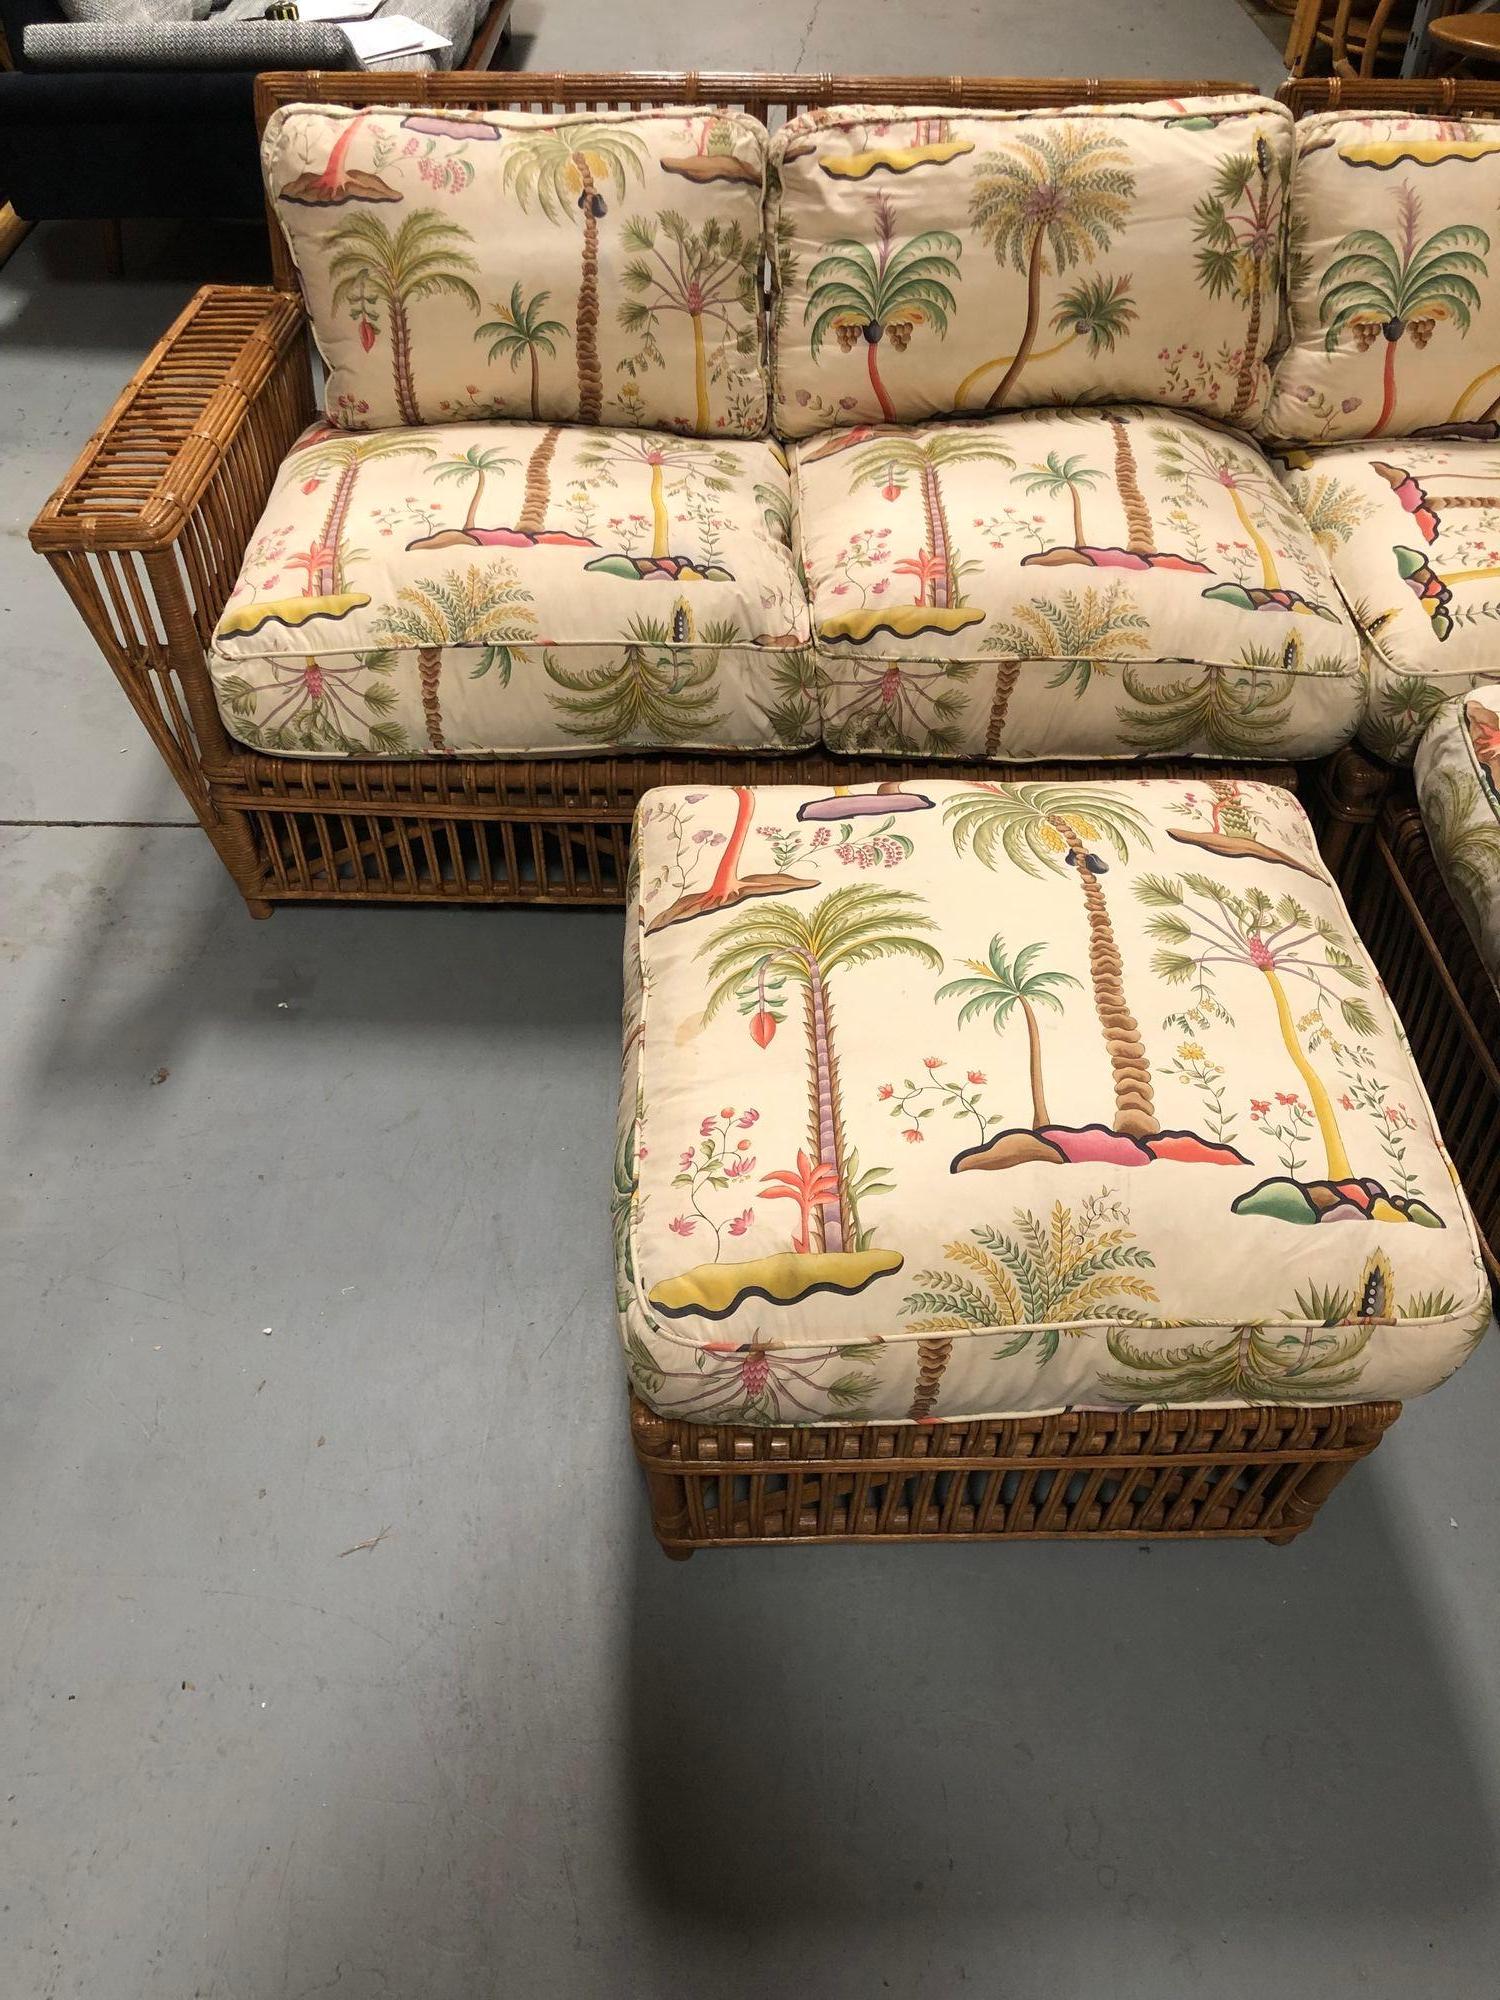 Presidents Stick Reed Rattan L-Shaped Corner Sofa and Ottoman Livingroom Set In Excellent Condition For Sale In Van Nuys, CA